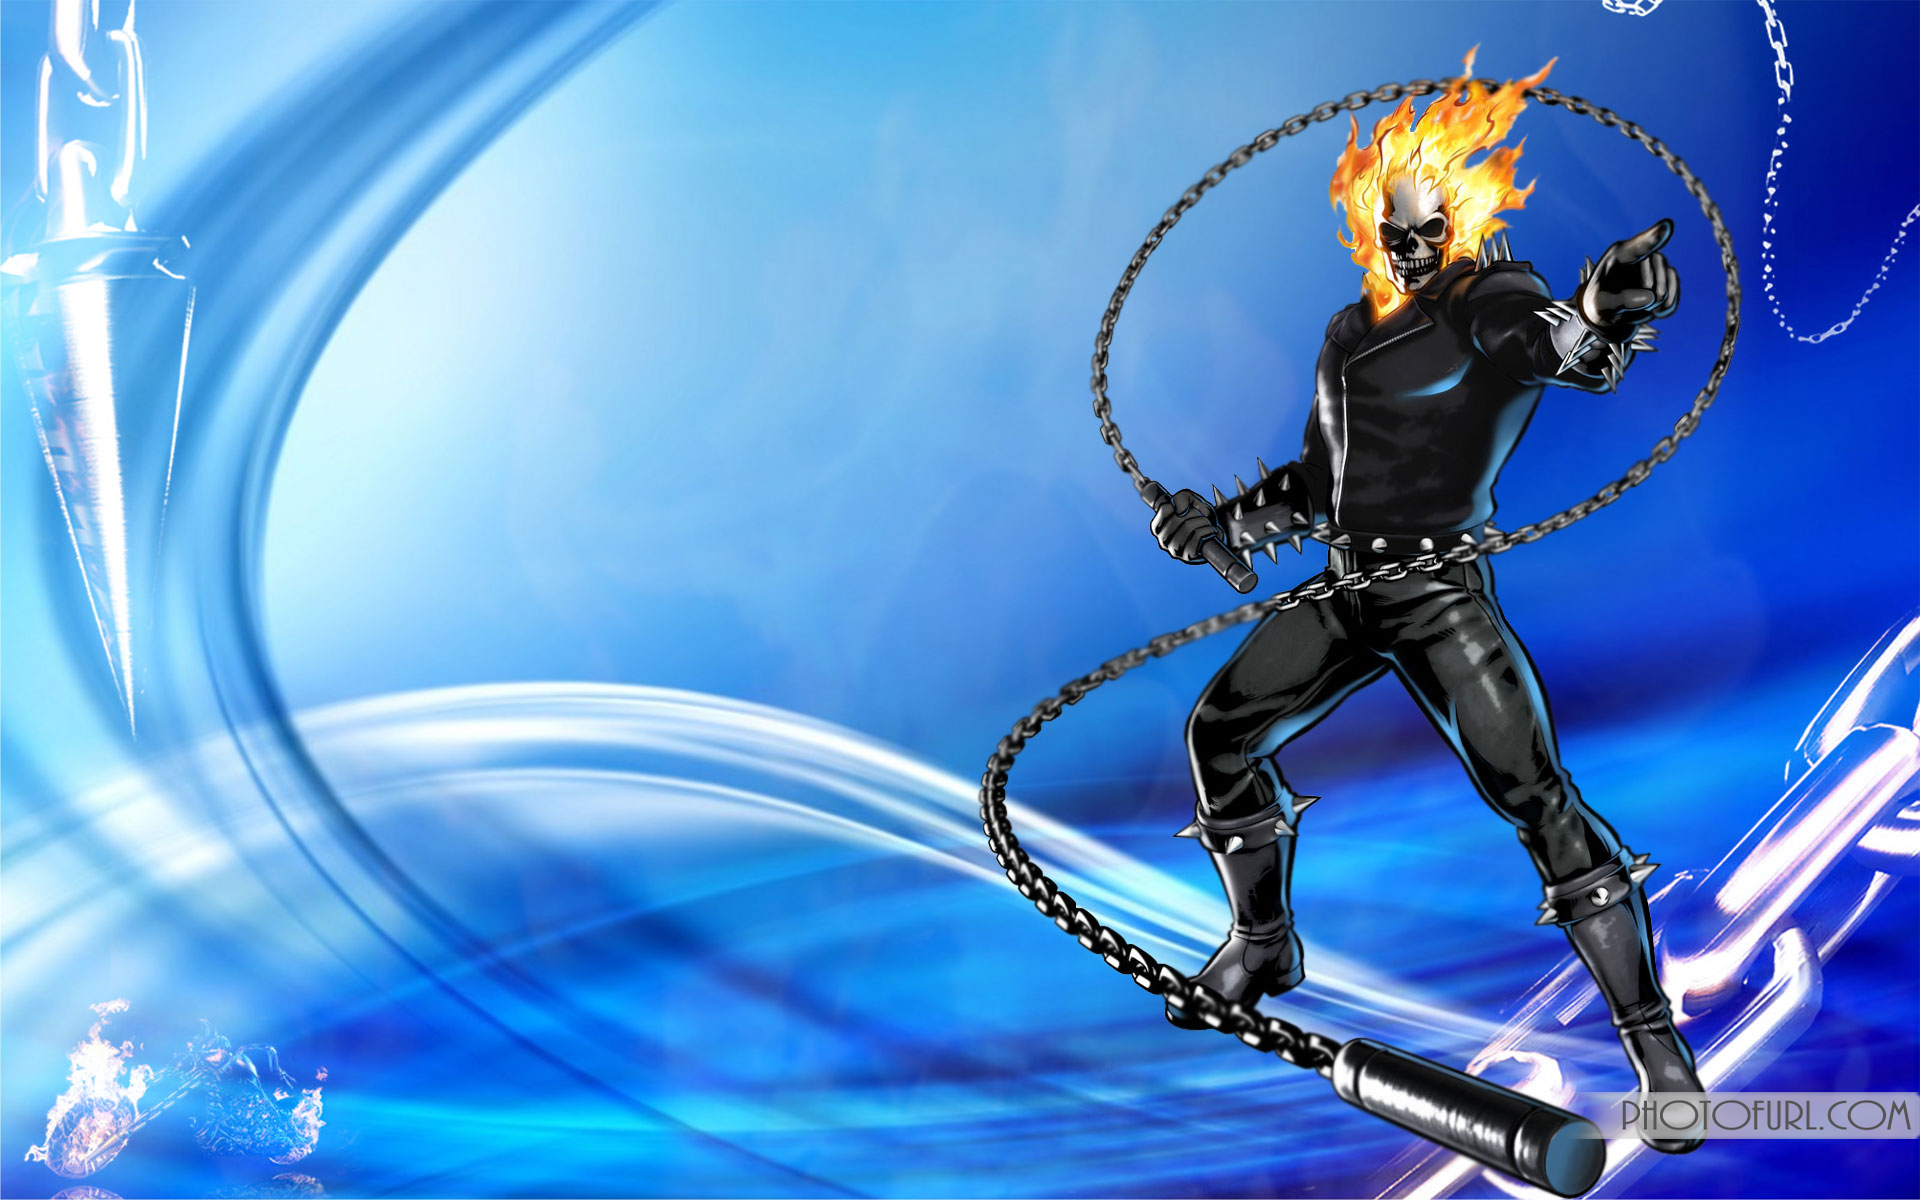 Wallpapers Ghost Rider Hd 1920x1200 #ghost